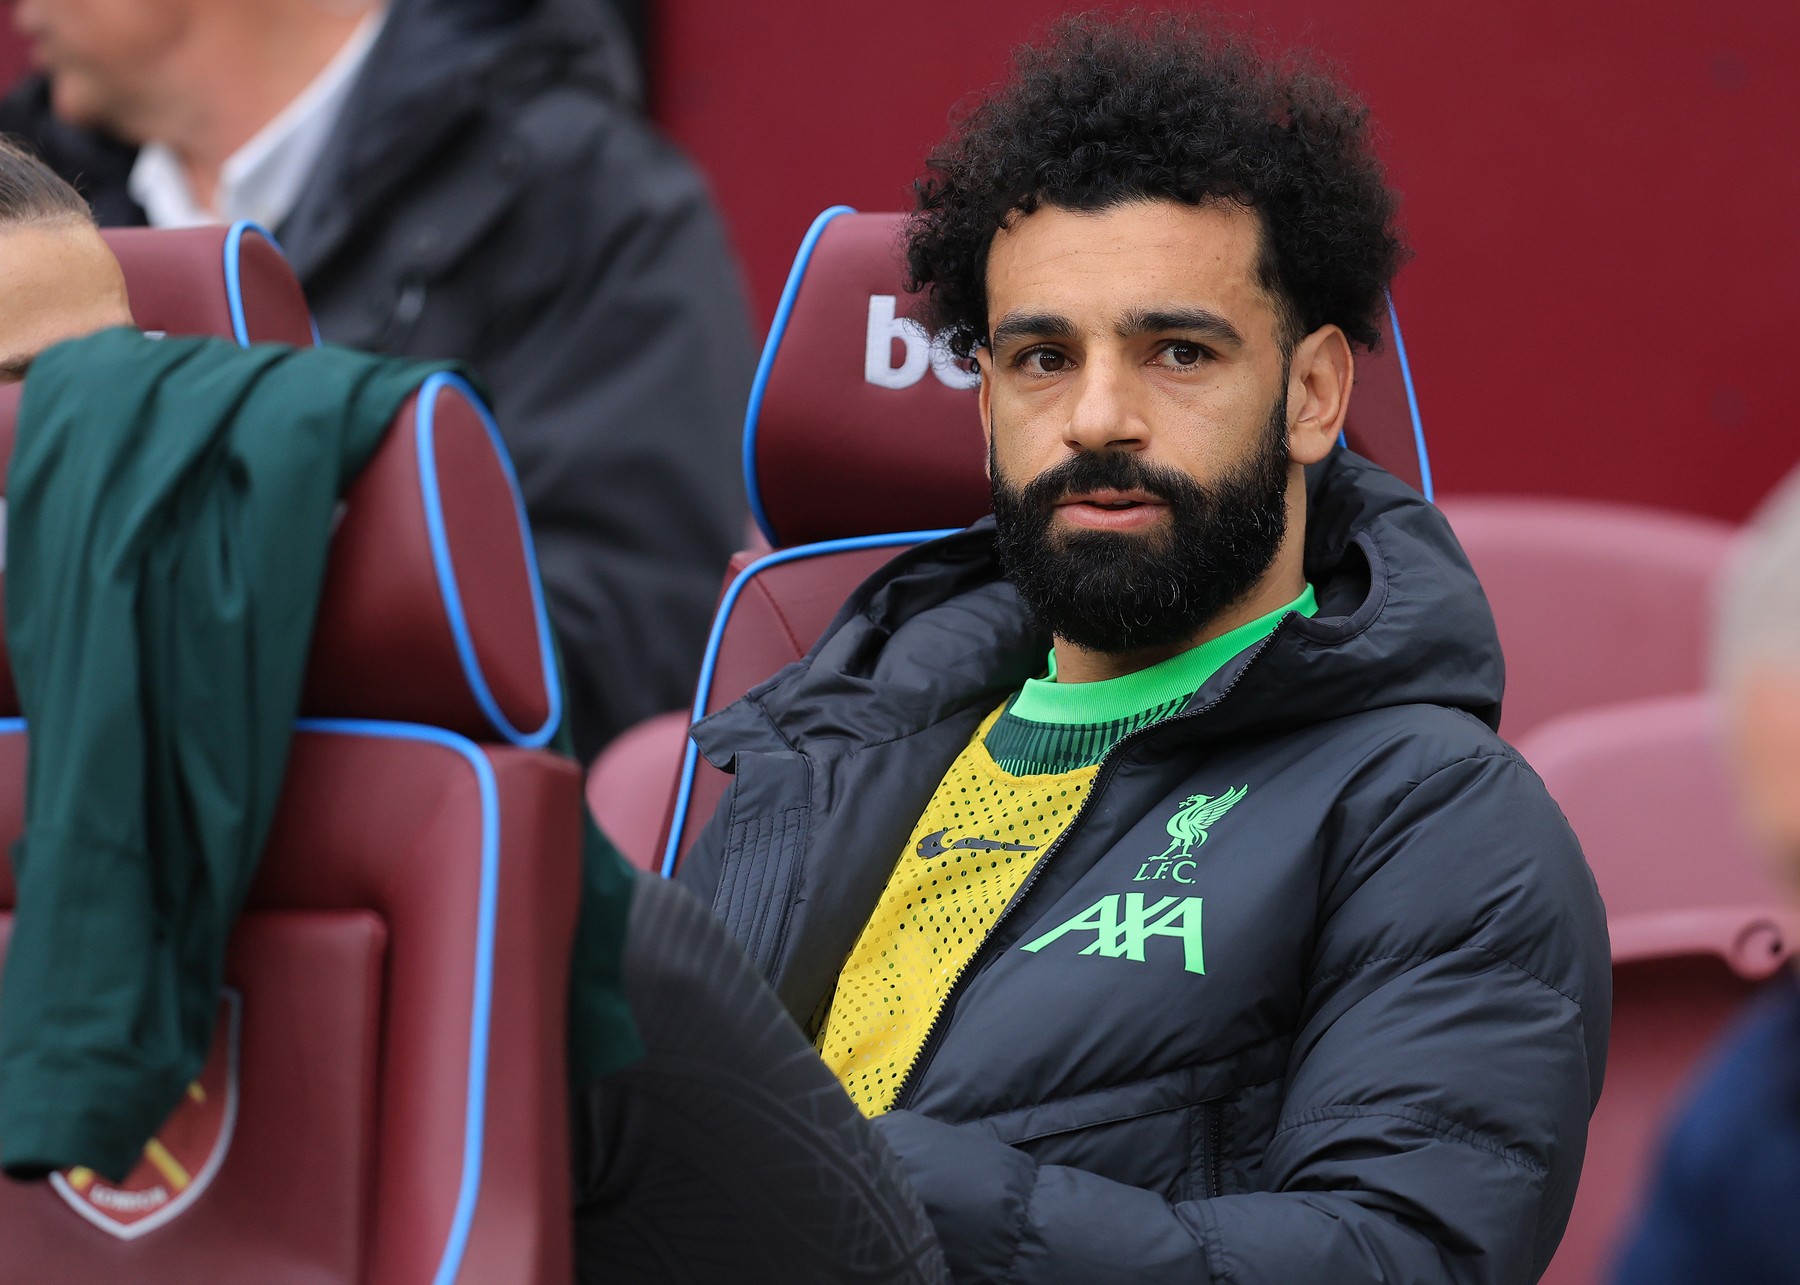 April 27, 2024, London: London, England, 27th April 2024. Mohamed Salah of Liverpool sits on the subs bench during the Premier League match at the London Stadium, London.,Image: 868343791, License: Rights-managed, Restrictions: * United Kingdom Rights OUT *, Model Release: no, Credit line: Paul Terry / Zuma Press / Profimedia